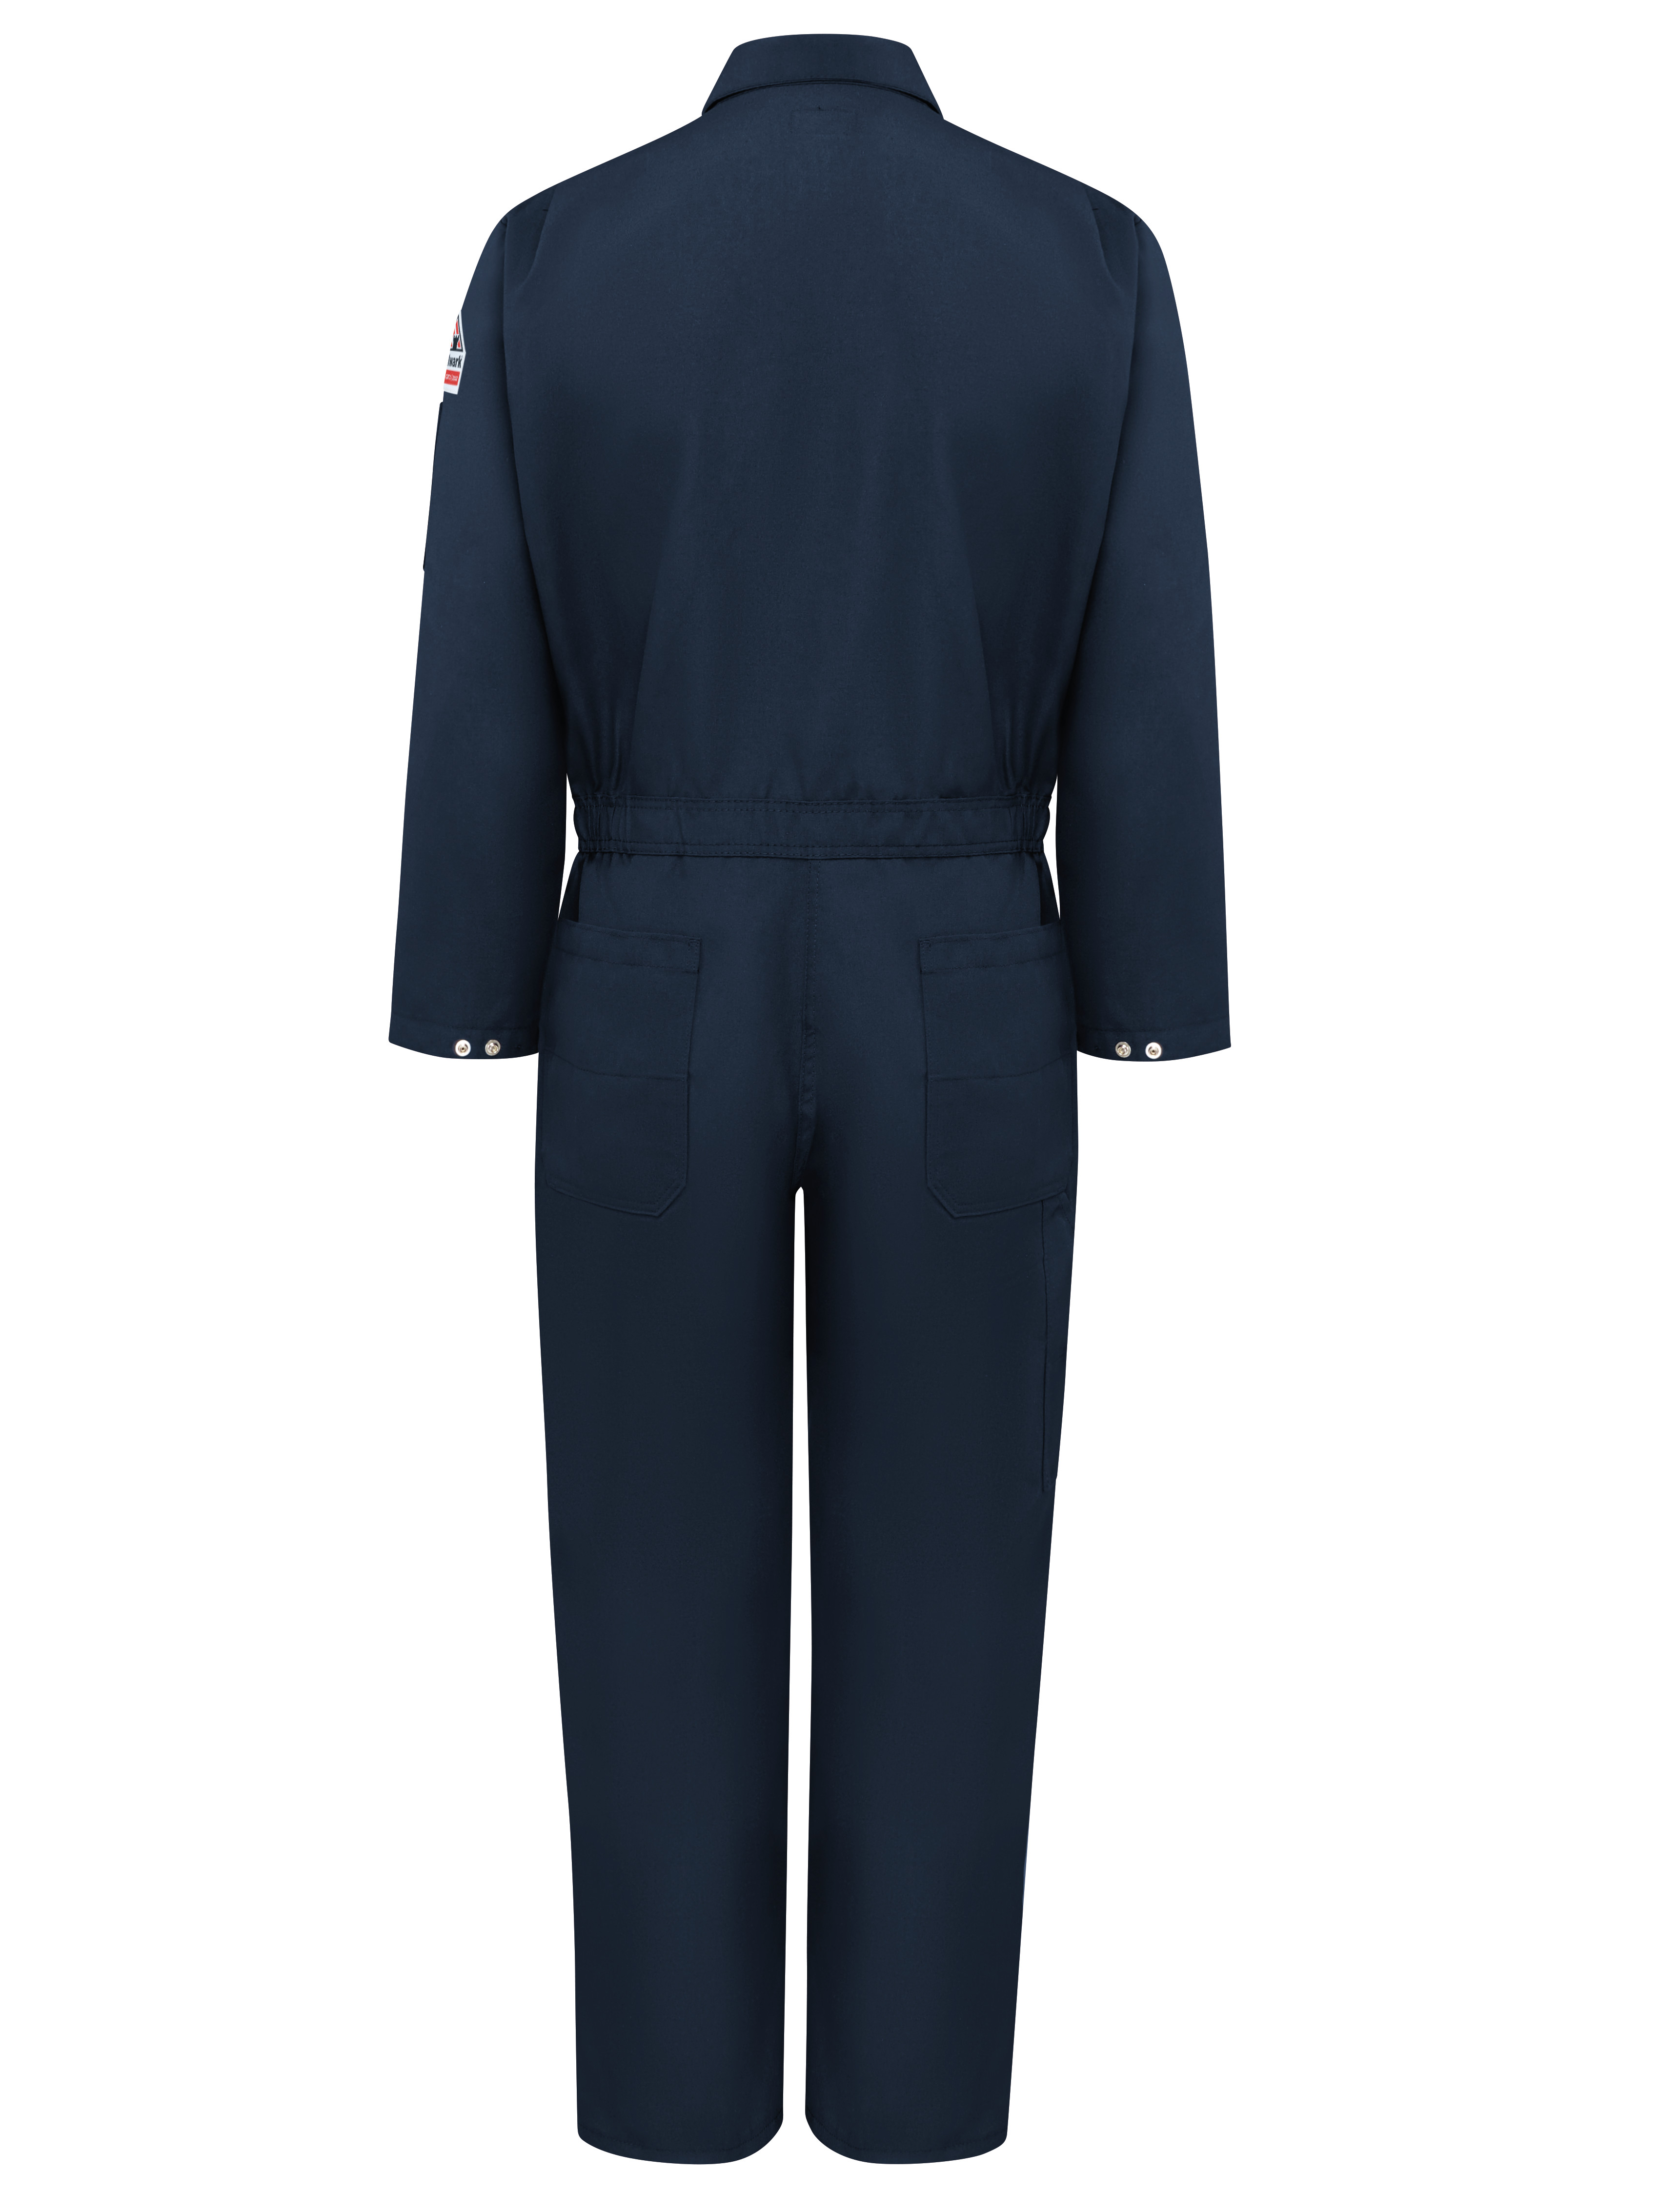 Picture of Bulwark® CNB2 Men's Lightweight Nomex FR Premium Coverall